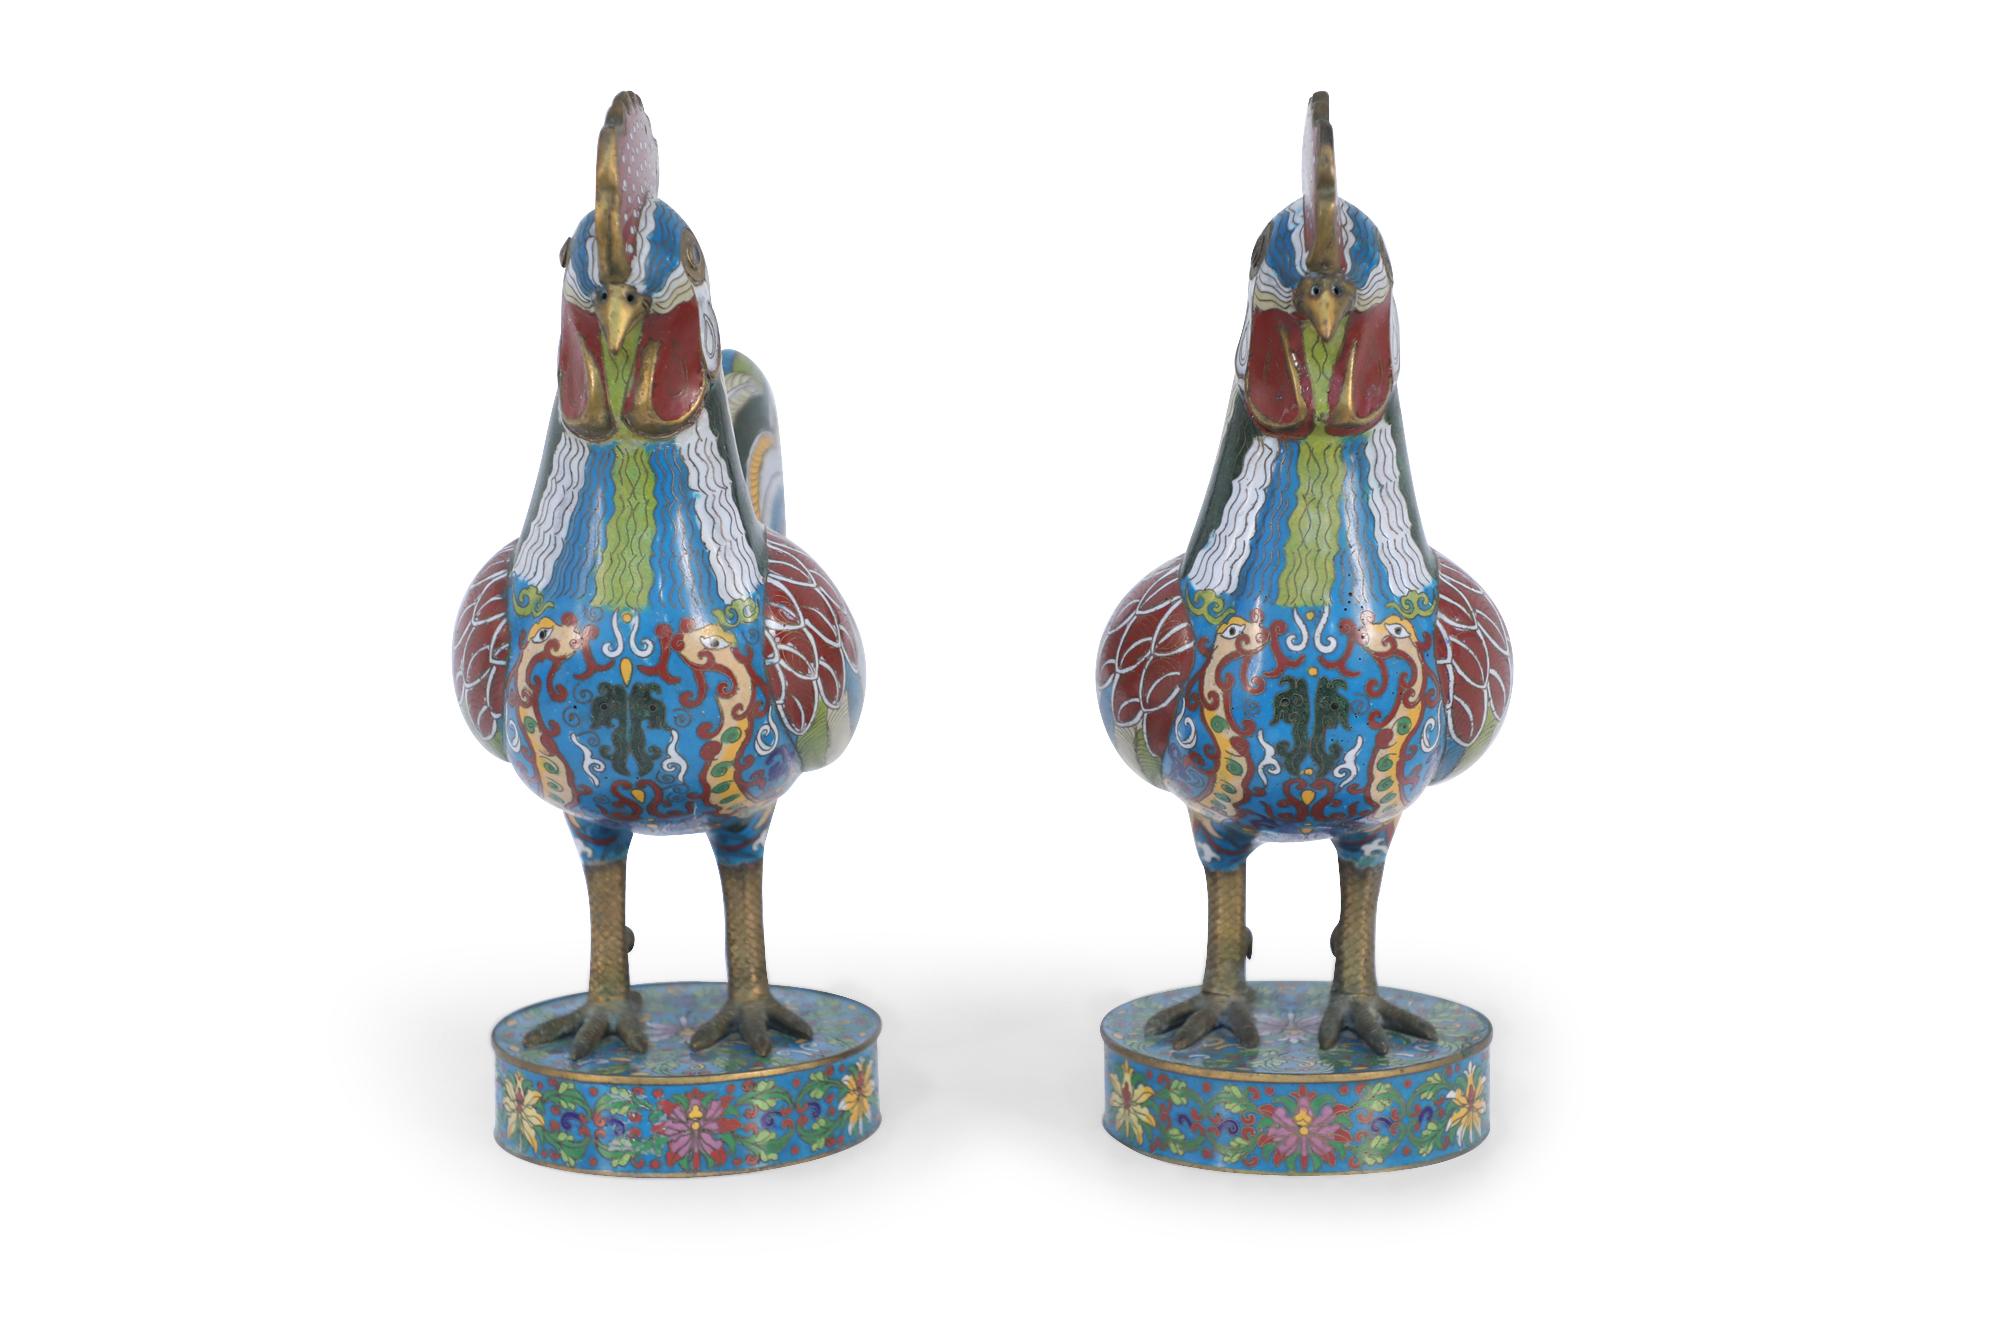 Pair of early 20th century Chinese cloisonne rooster sculptures with red, white, blue, green, and yellow enamels standing on circular cloisonne bases with a floral border design.